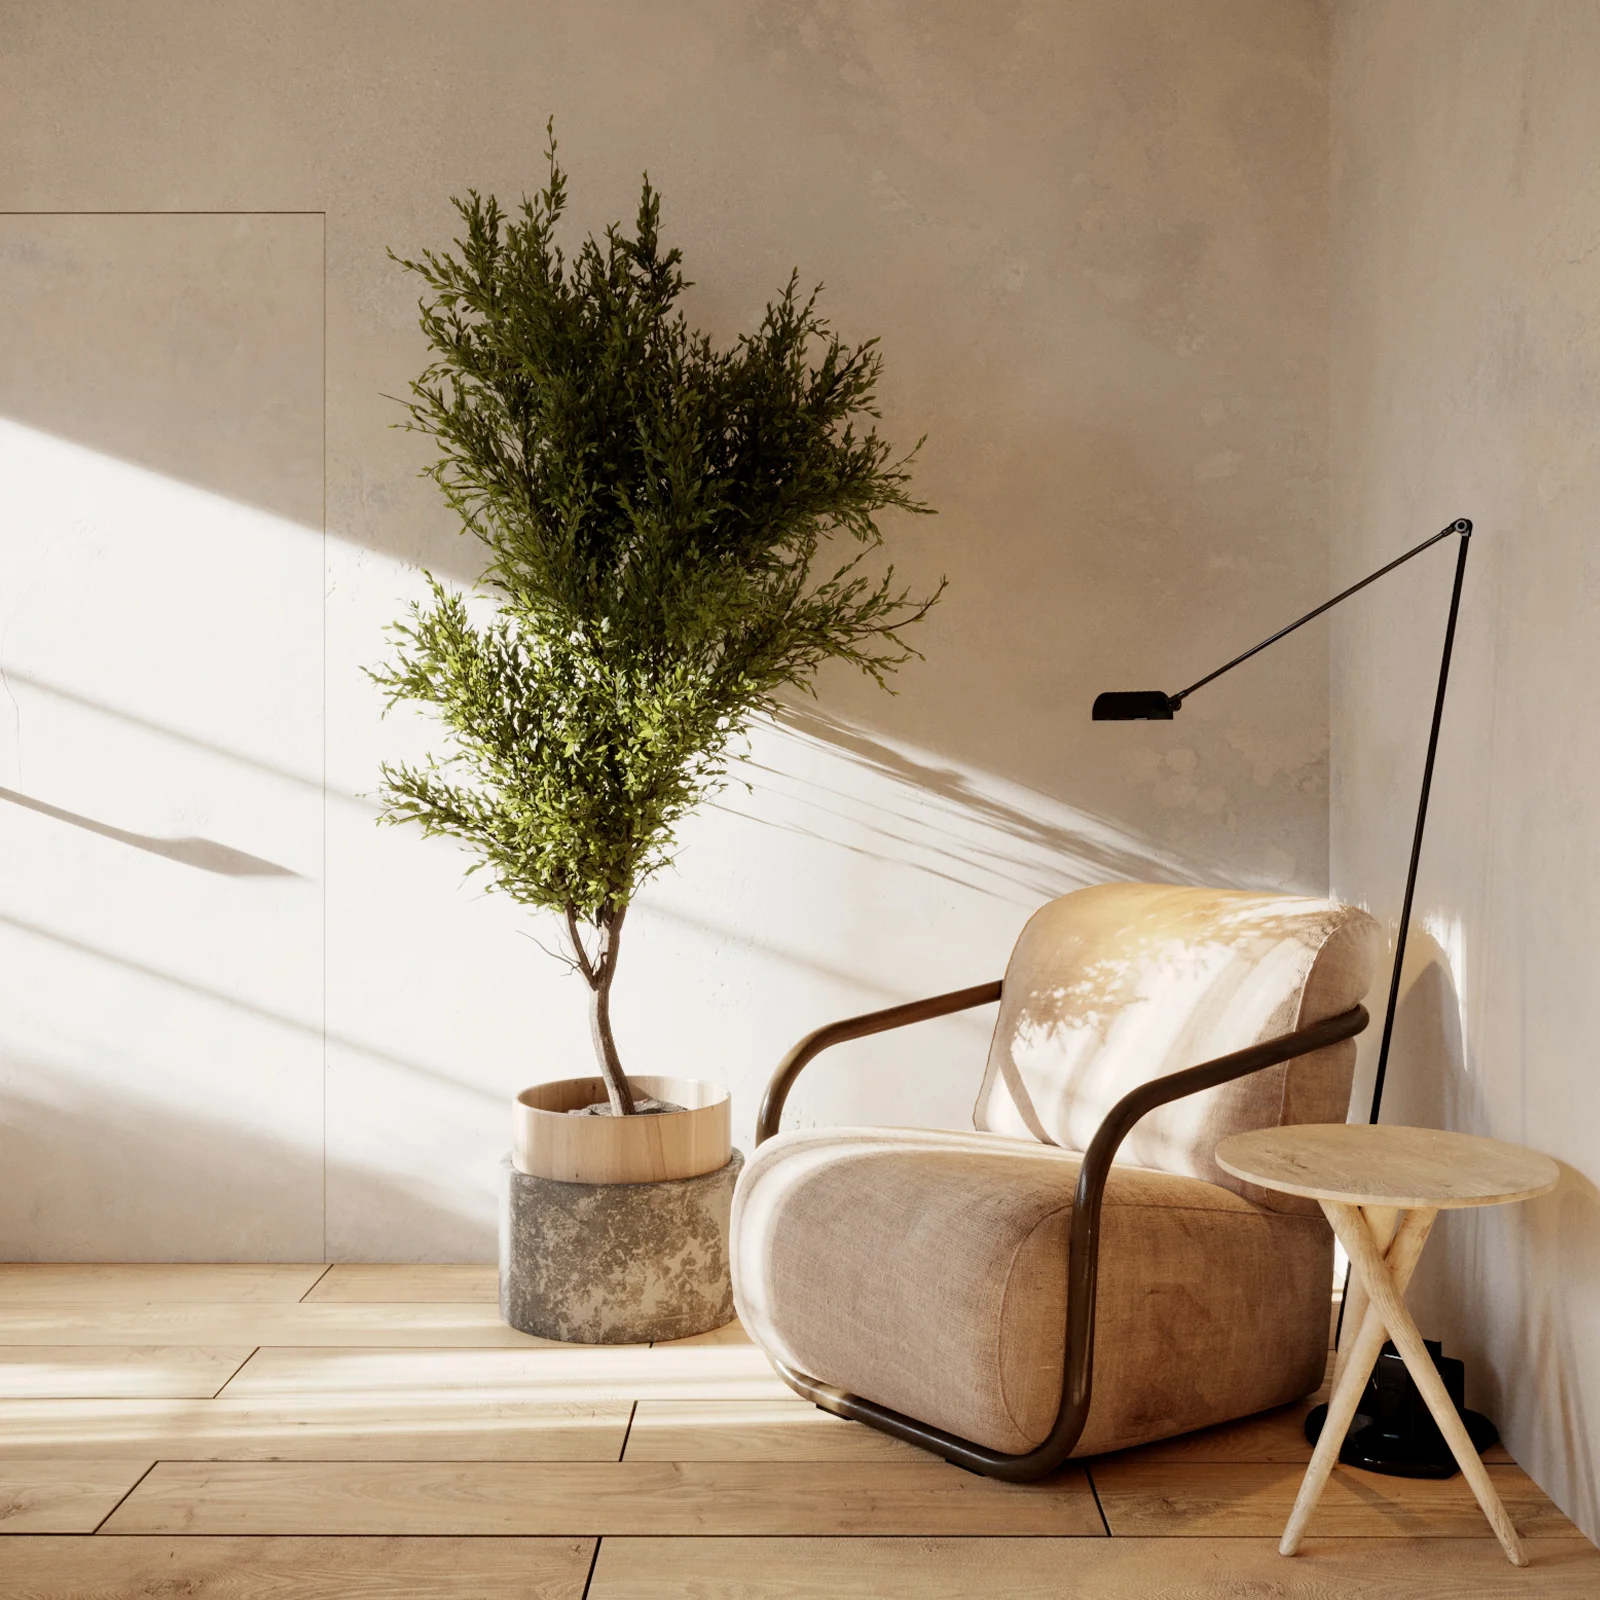 3d interior render: a tree and a chair in the corner of the room